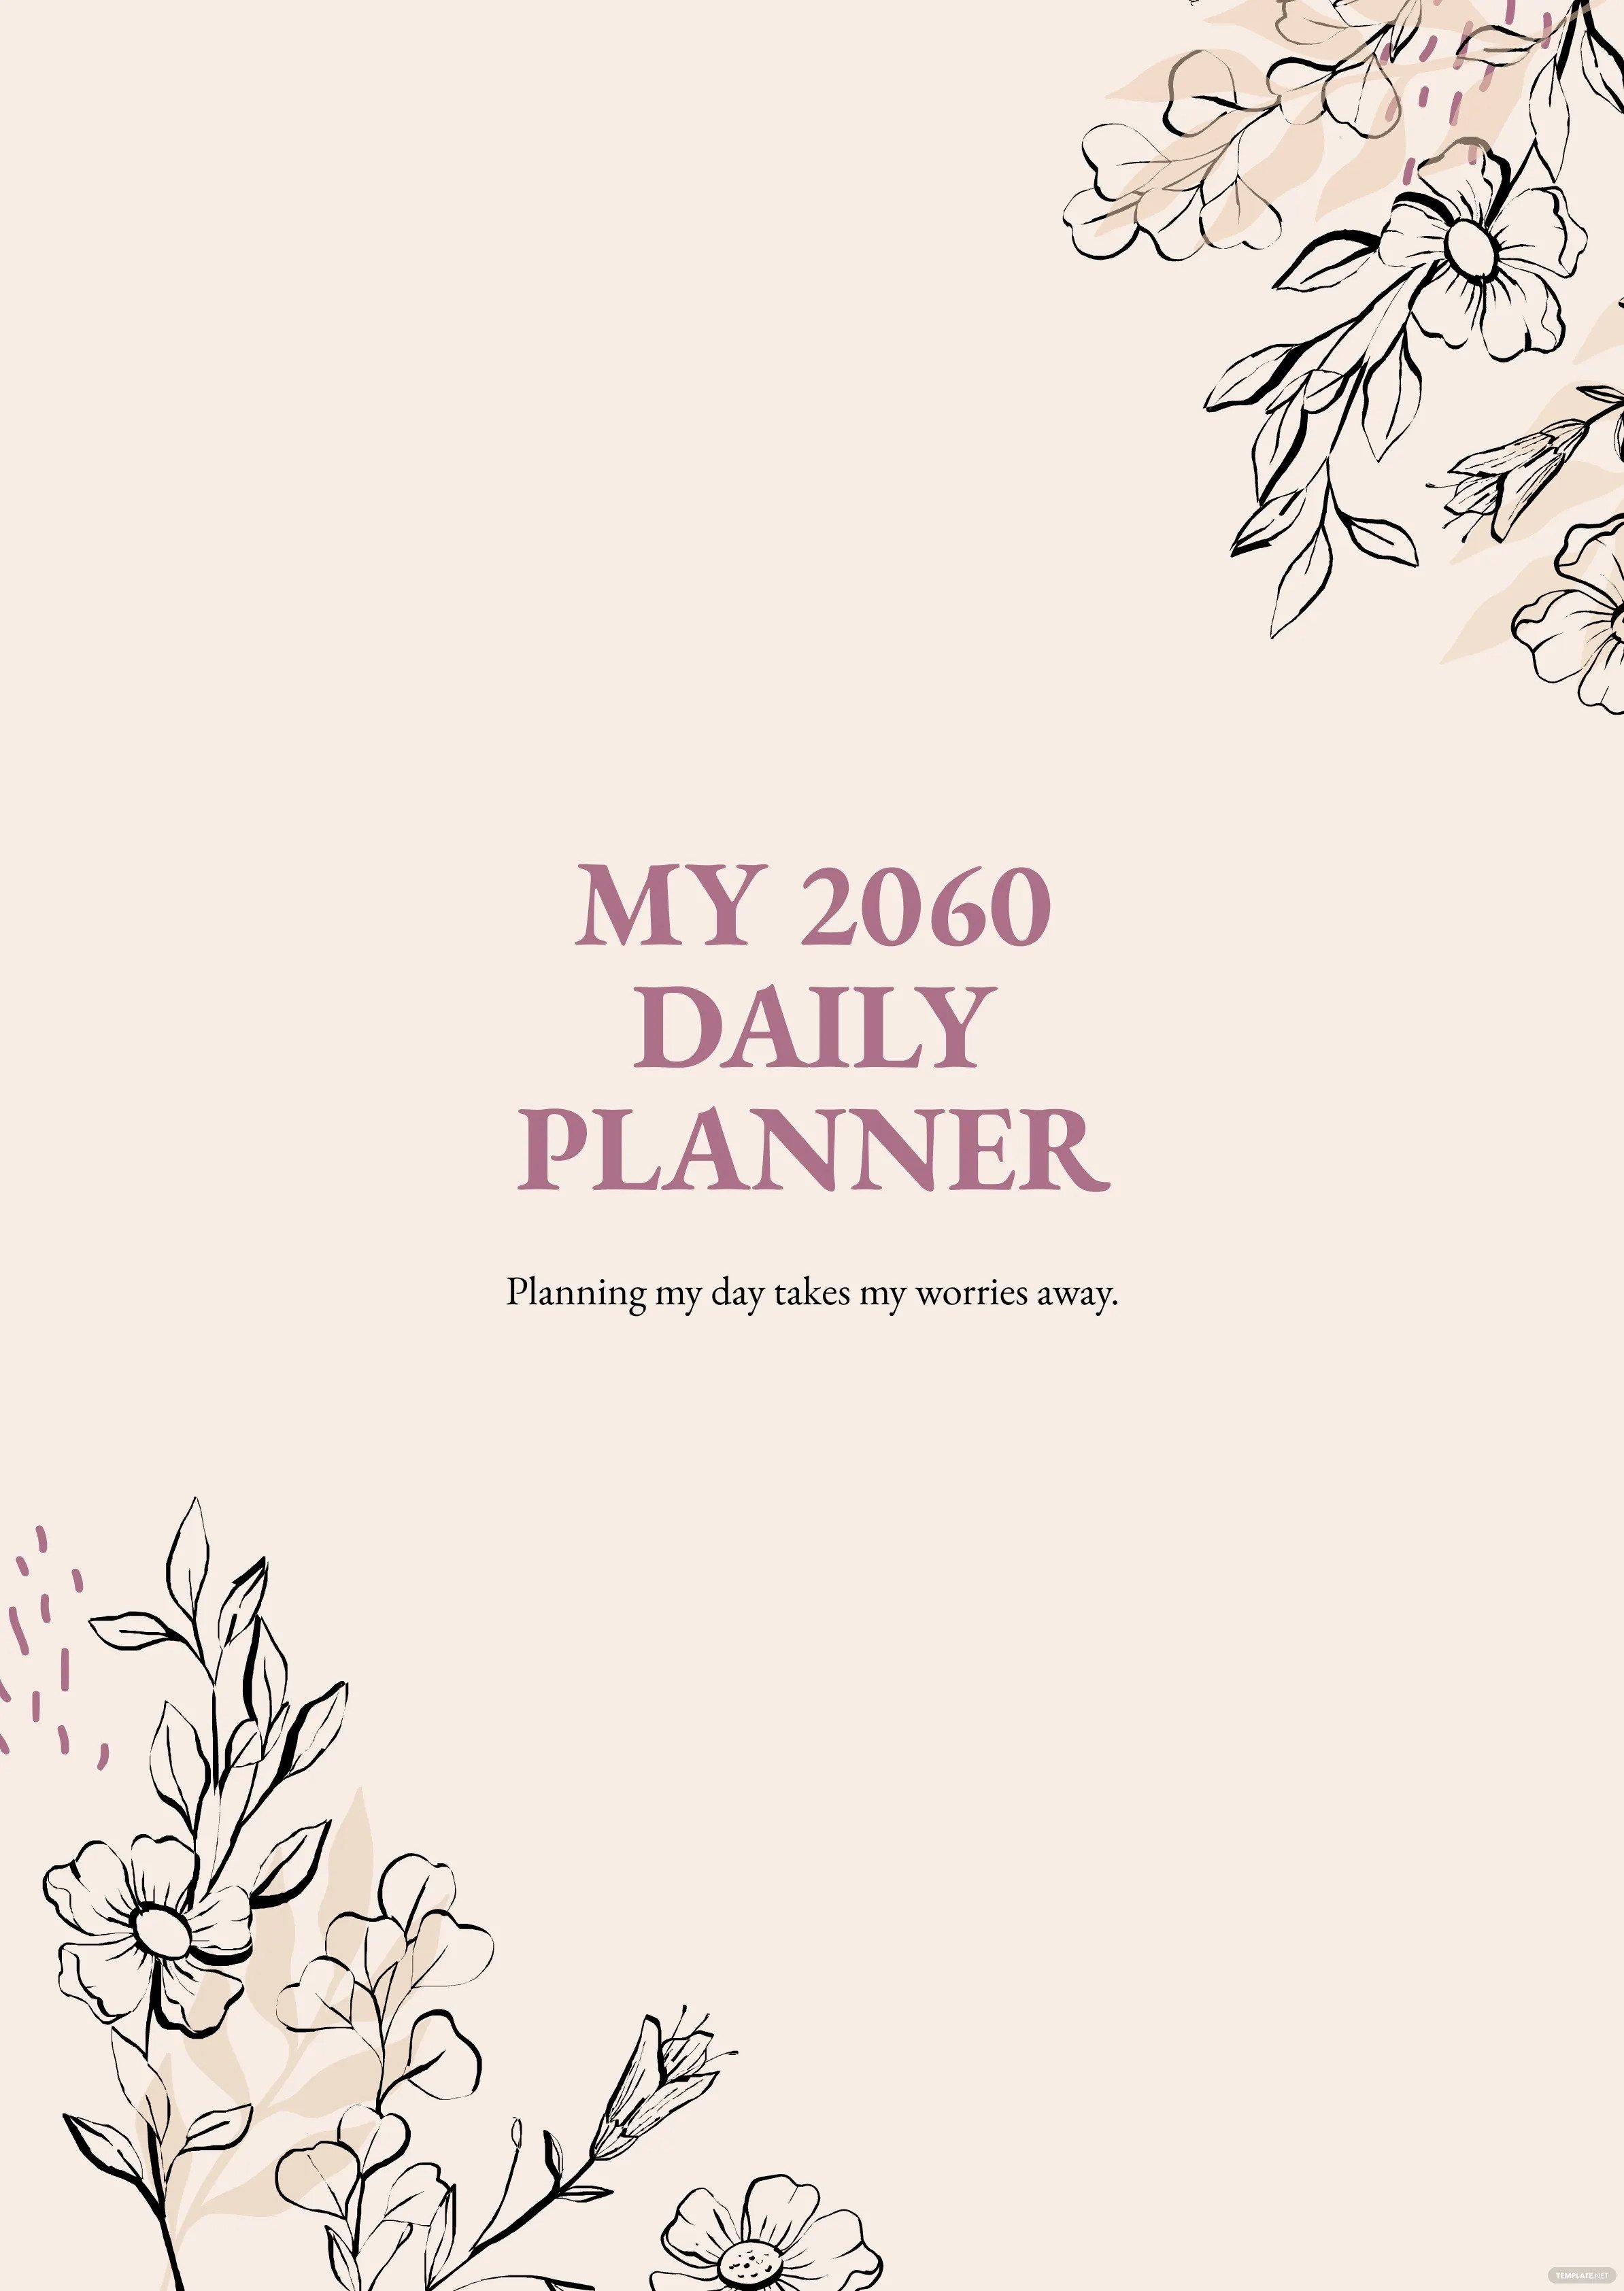 daily planner cover ideas and examples